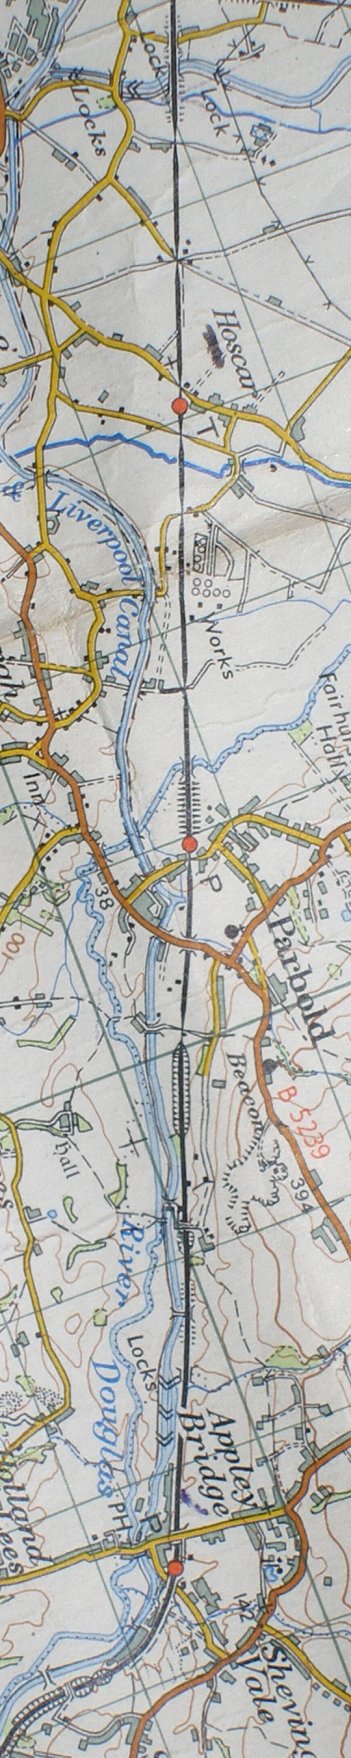 Section from the Ordnance Survey map 1961 showing L&YR railway line from Burscough Bridge Junction to Parbold railway station